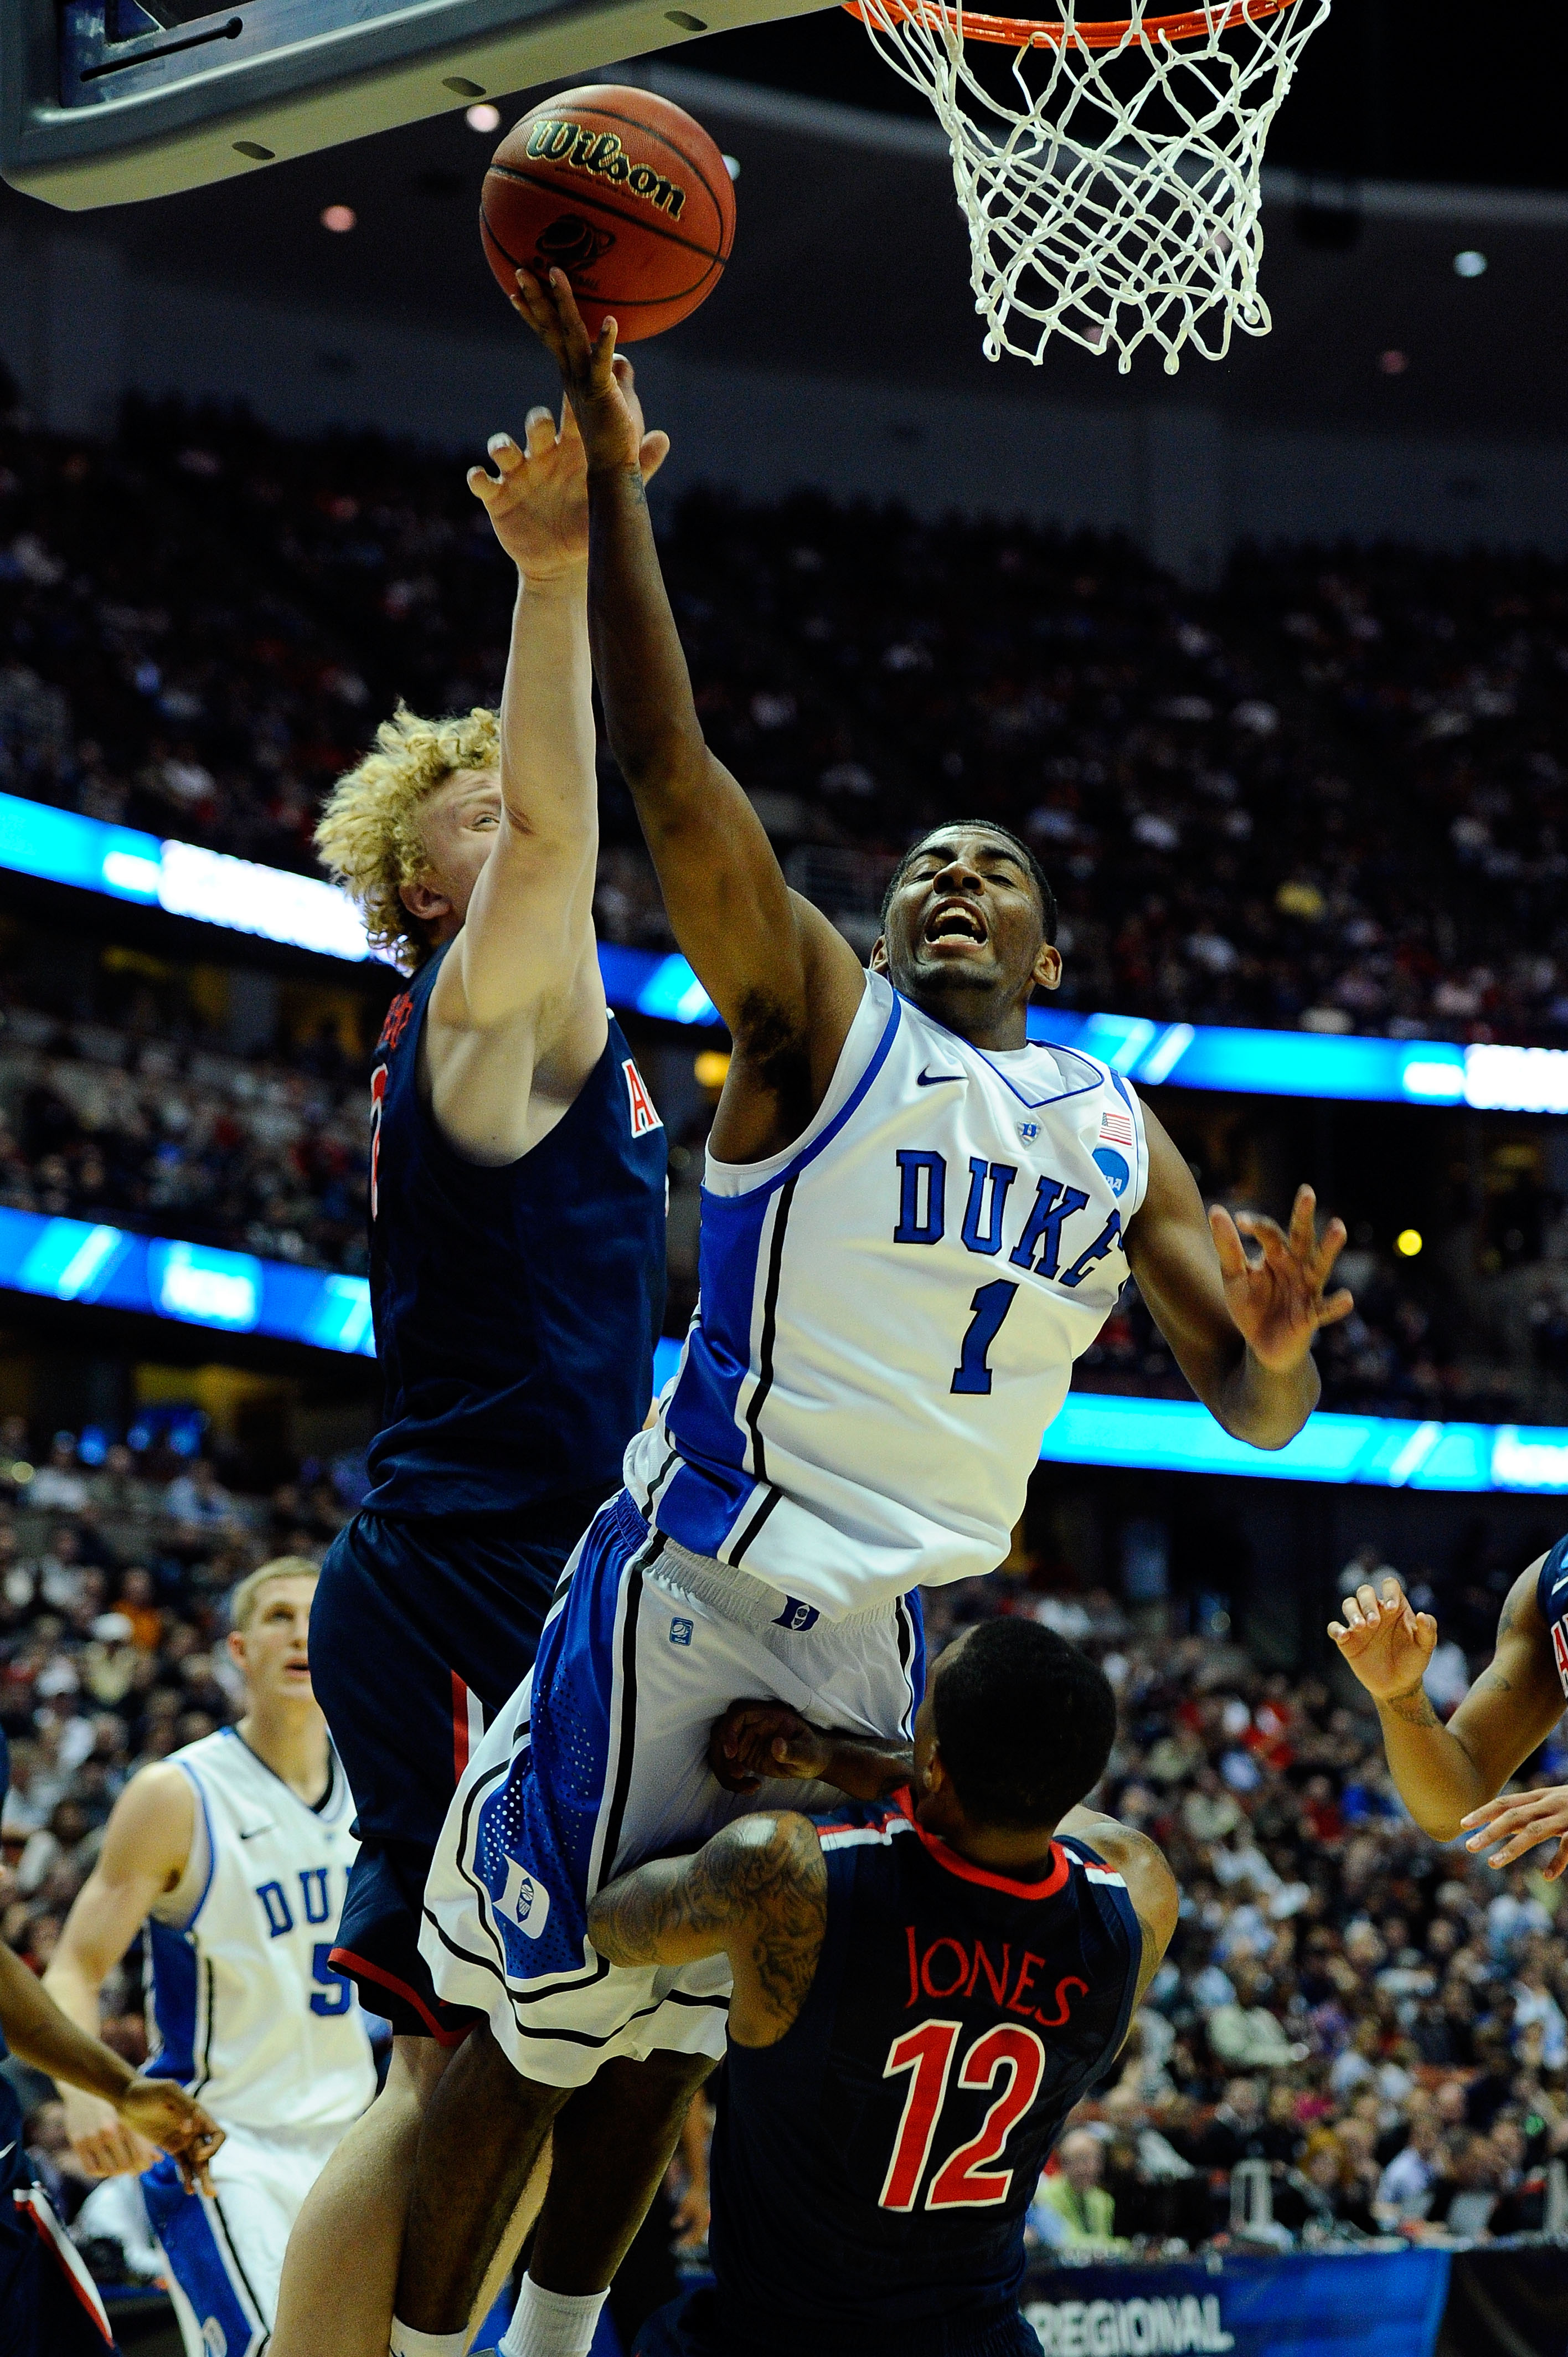 ANAHEIM, CA - MARCH 24:  Kyrie Irving #1 of the Duke Blue Devils draws contact against Kyryl Natyazhko #1 and Lamont Jones #12 of the Arizona Wildcats during the west regional semifinal of the 2011 NCAA men's basketball tournament at the Honda Center on M